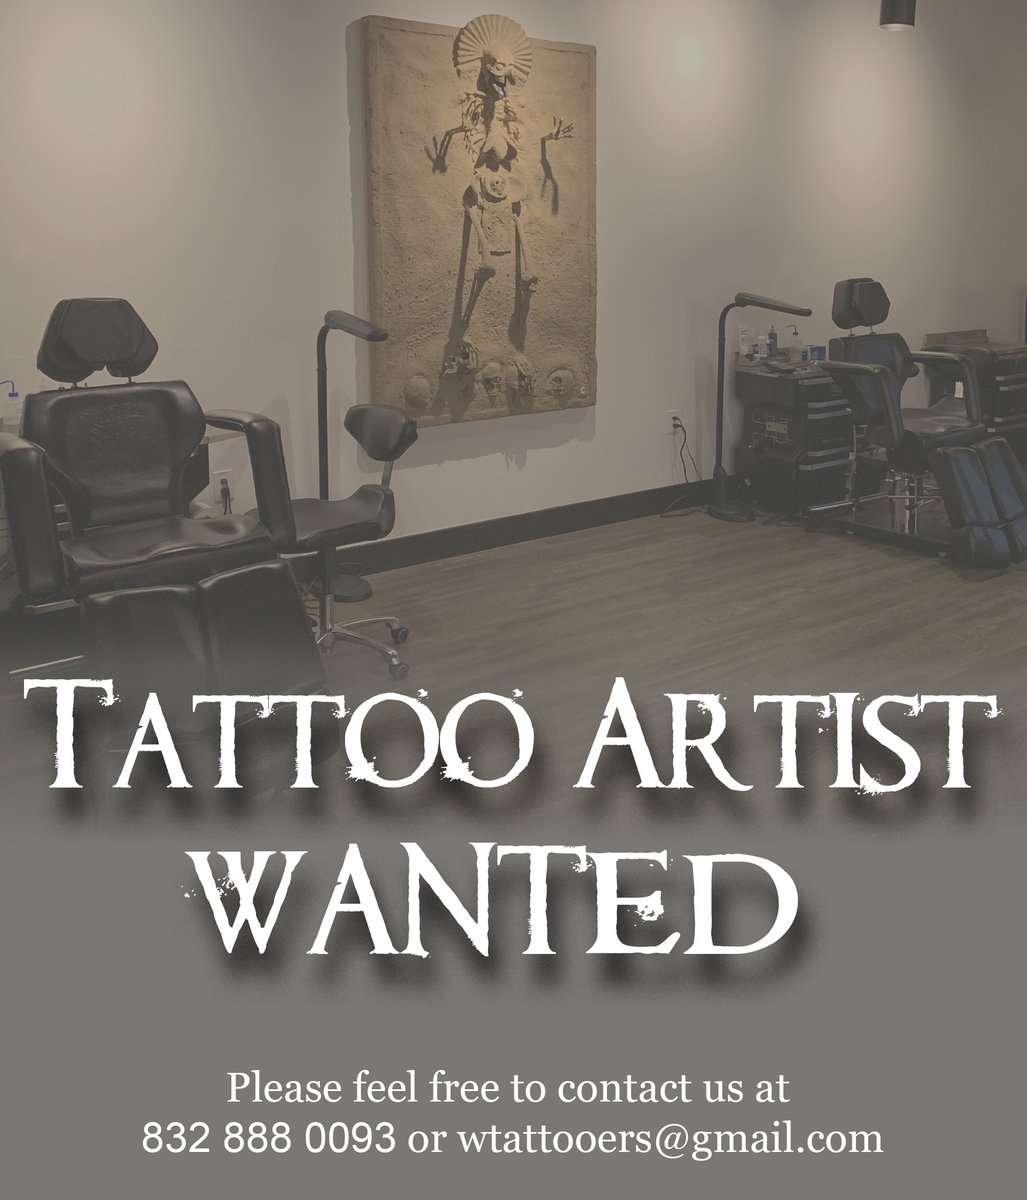 To apply to be our new resident artist send an email to wtattooers@gmail.com with portfolio and some information about yourself, your phone number, social media, etc. 
We’ll reach out to you to schedule an interview. 
#worldwidetattooers #worldwidetattooershouston #residentartist